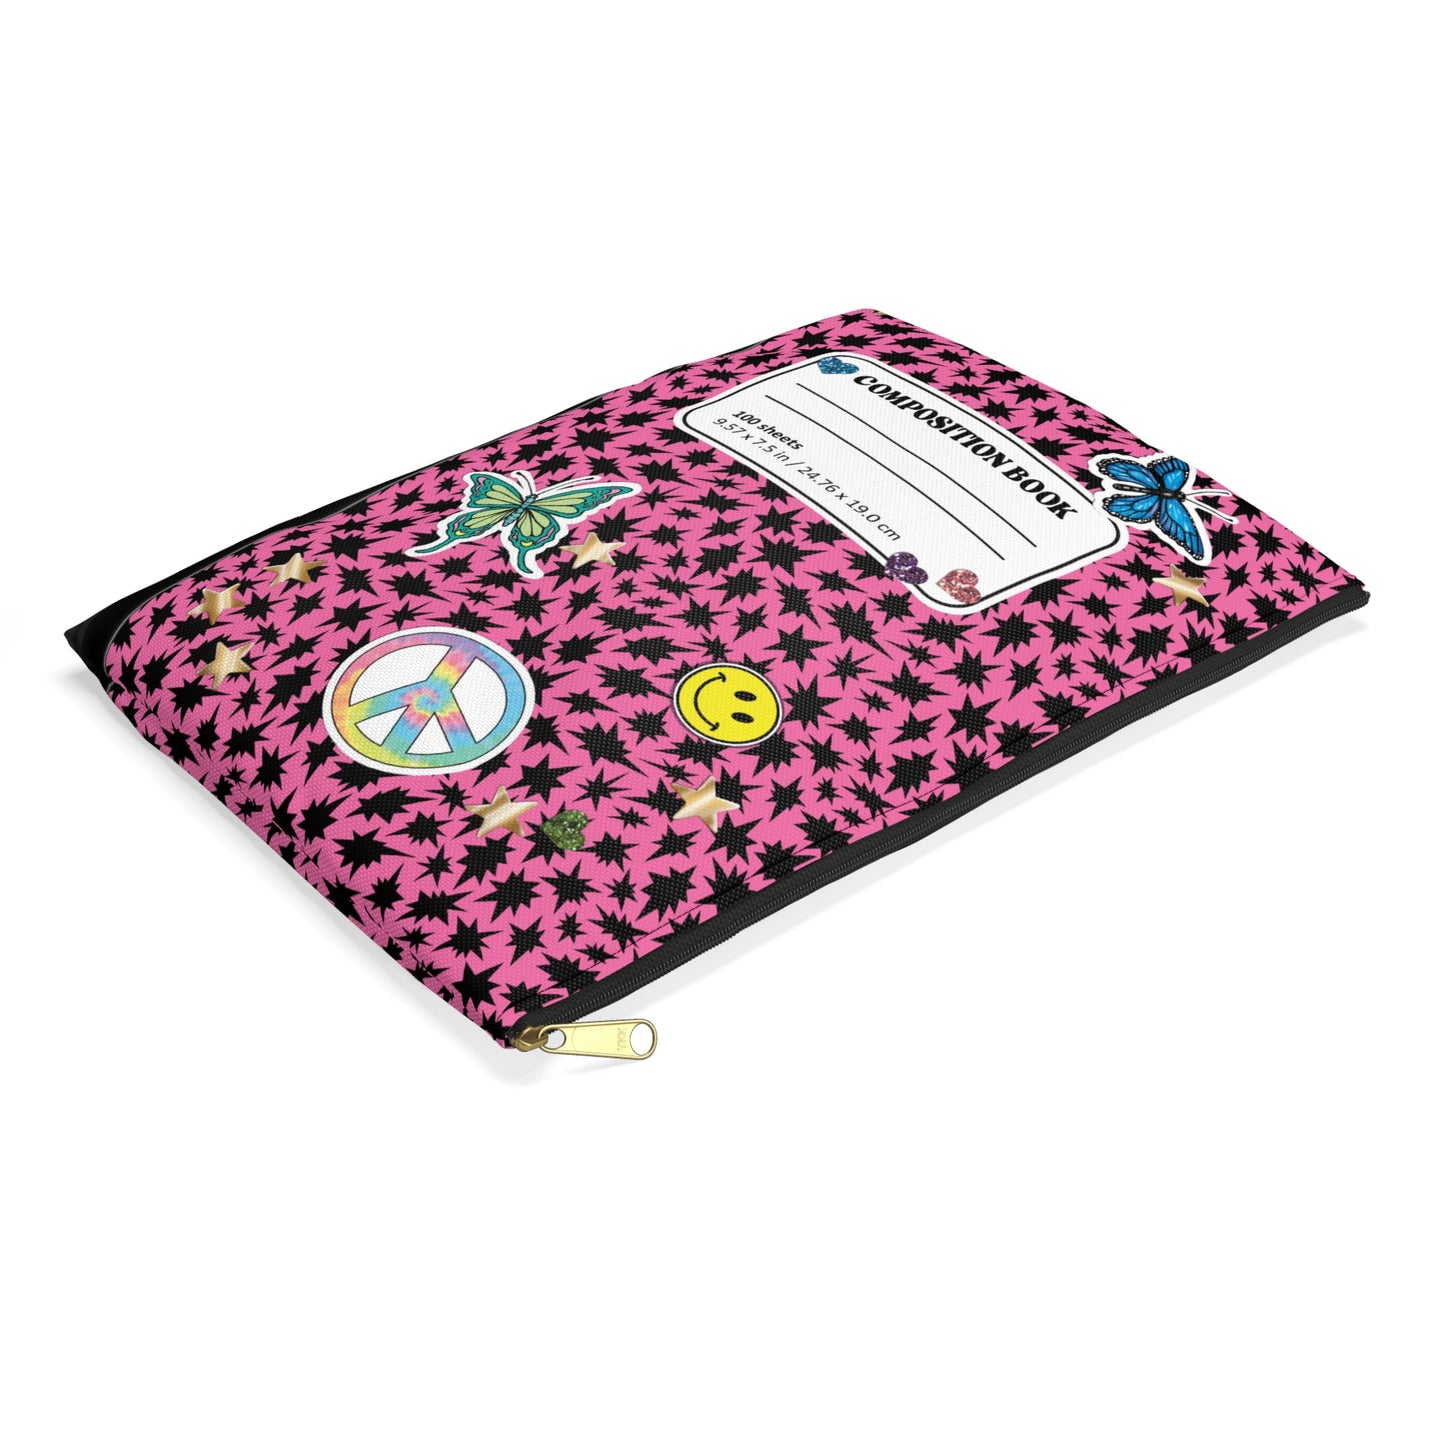 Pink 90s Composition Book Pouch